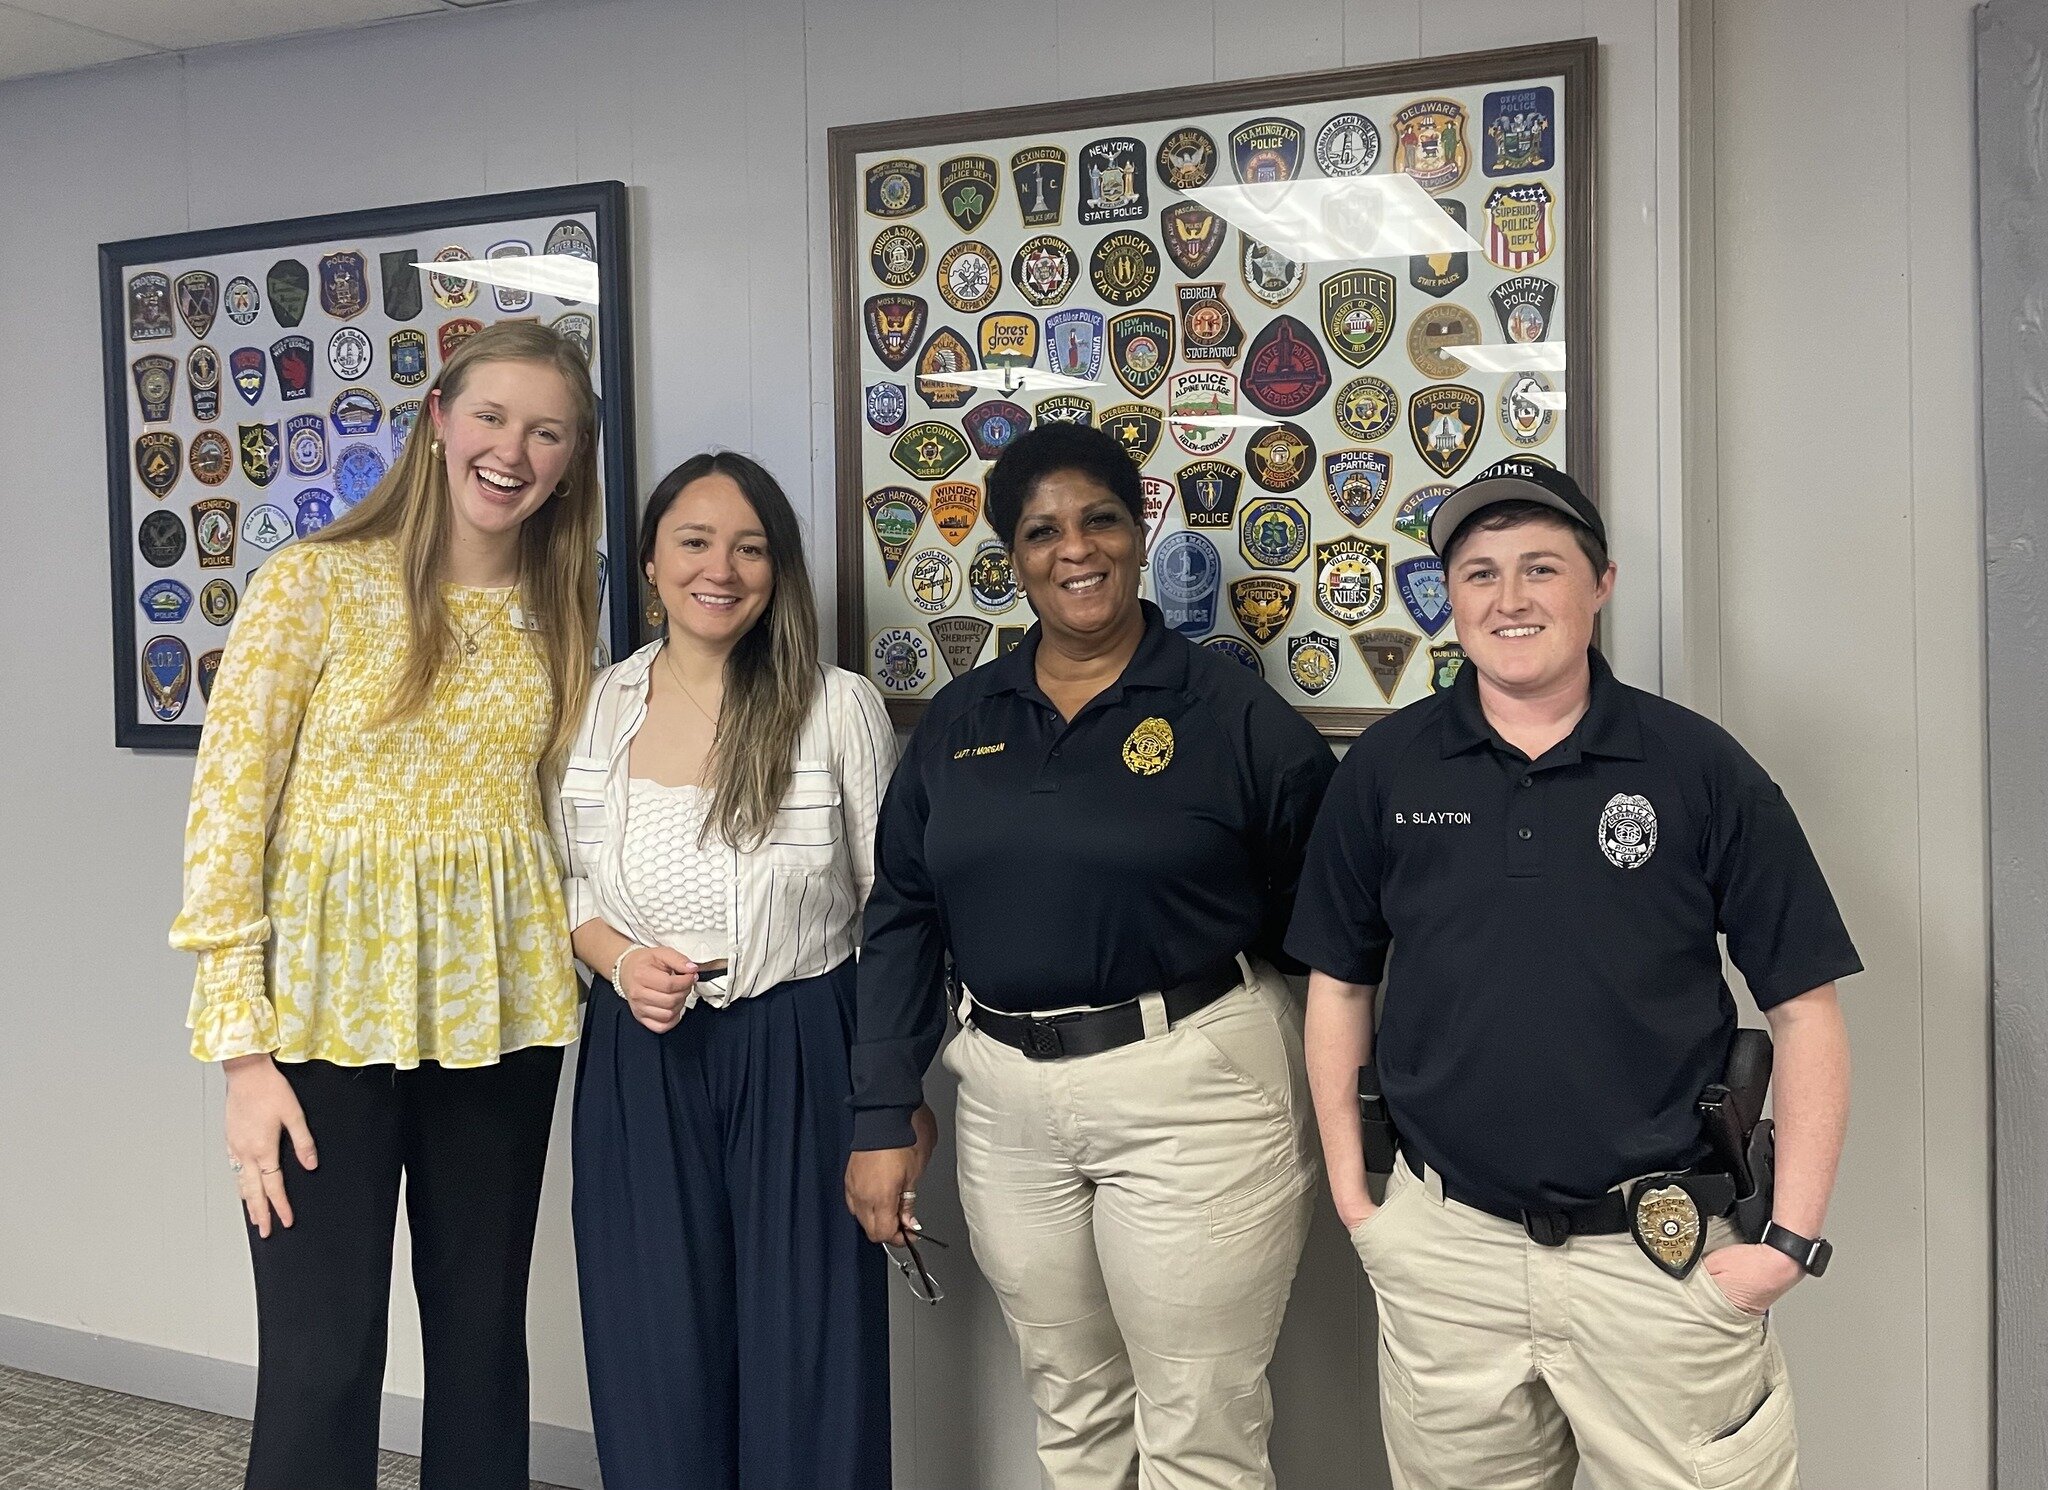 Caroline and Angela have enjoyed visiting Rome City Police Department for trainings about domestic violence and Hospitality House's services over the past two weeks. We are incredibly grateful for the ways RPD serves our community, and hope to contin